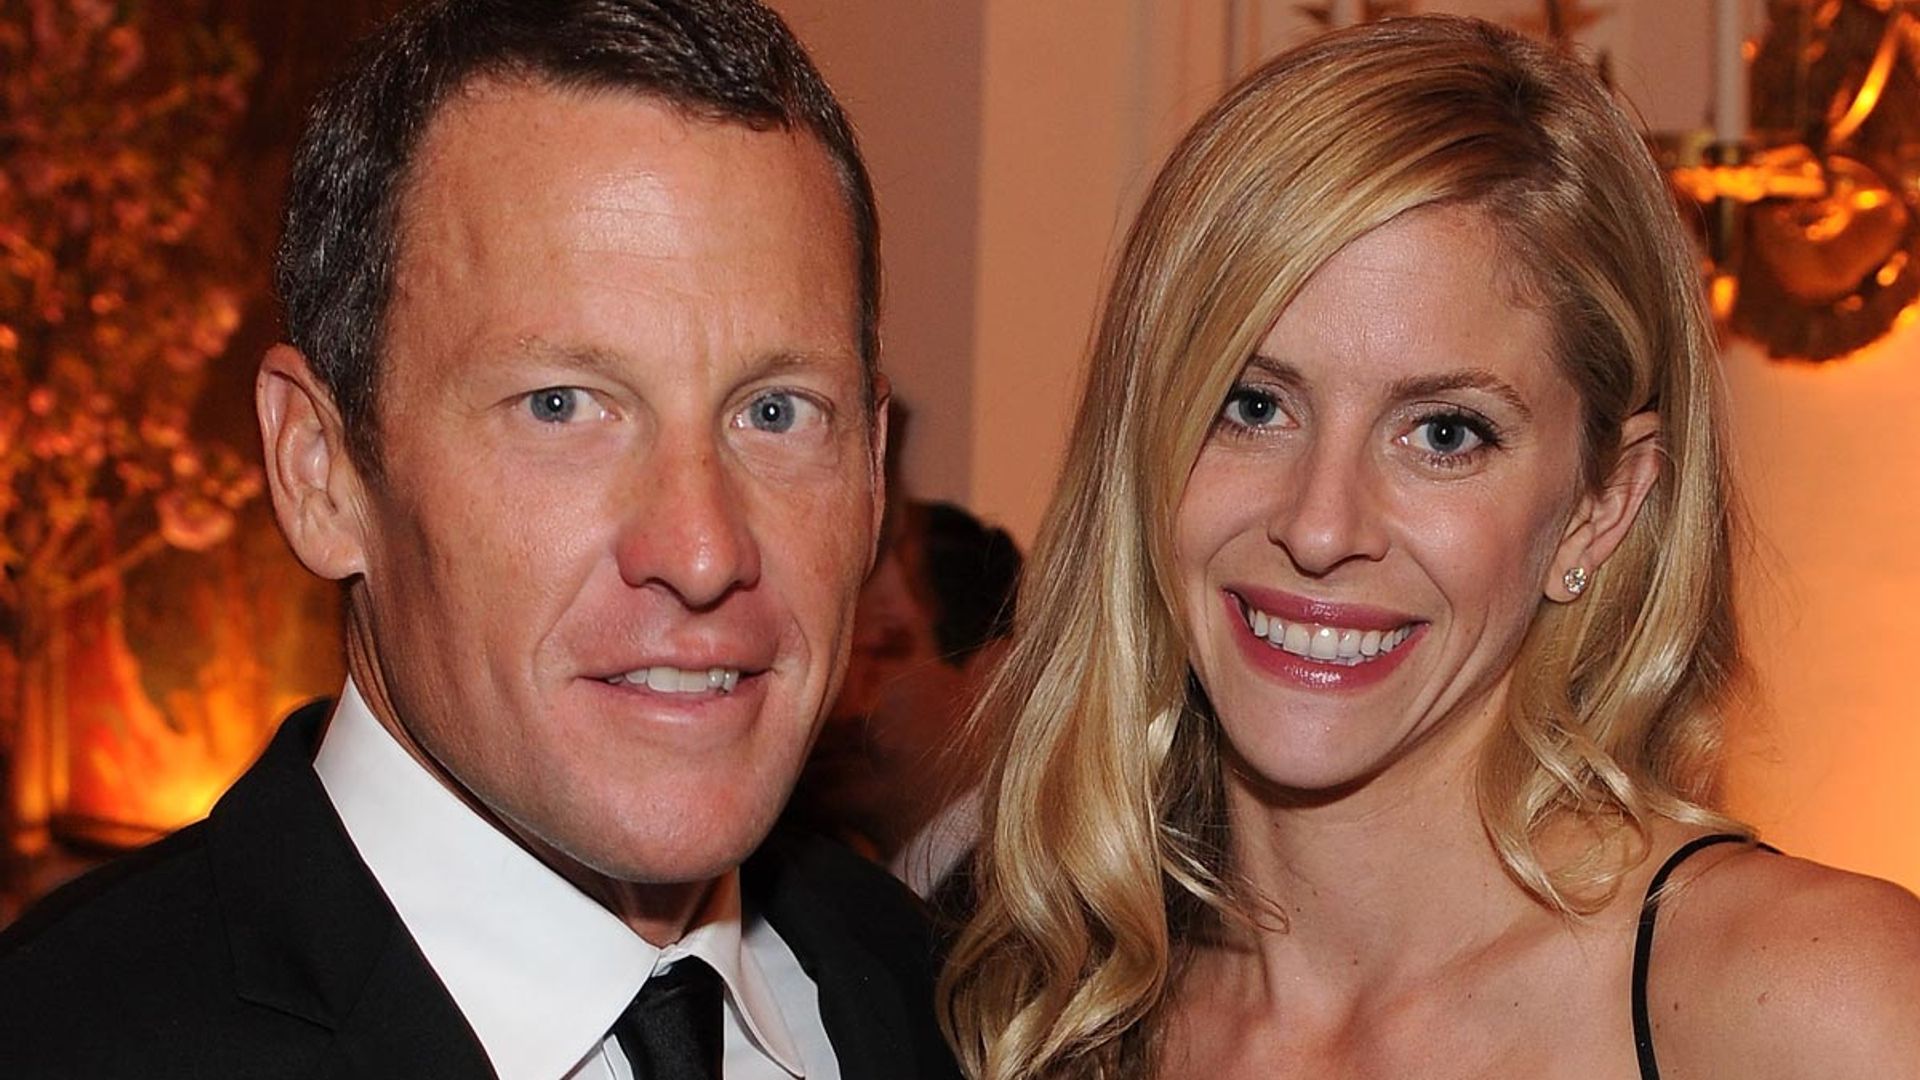 Lance Armstrong's bride Anna stuns in thigh-split wedding dress for emotional French nuptials